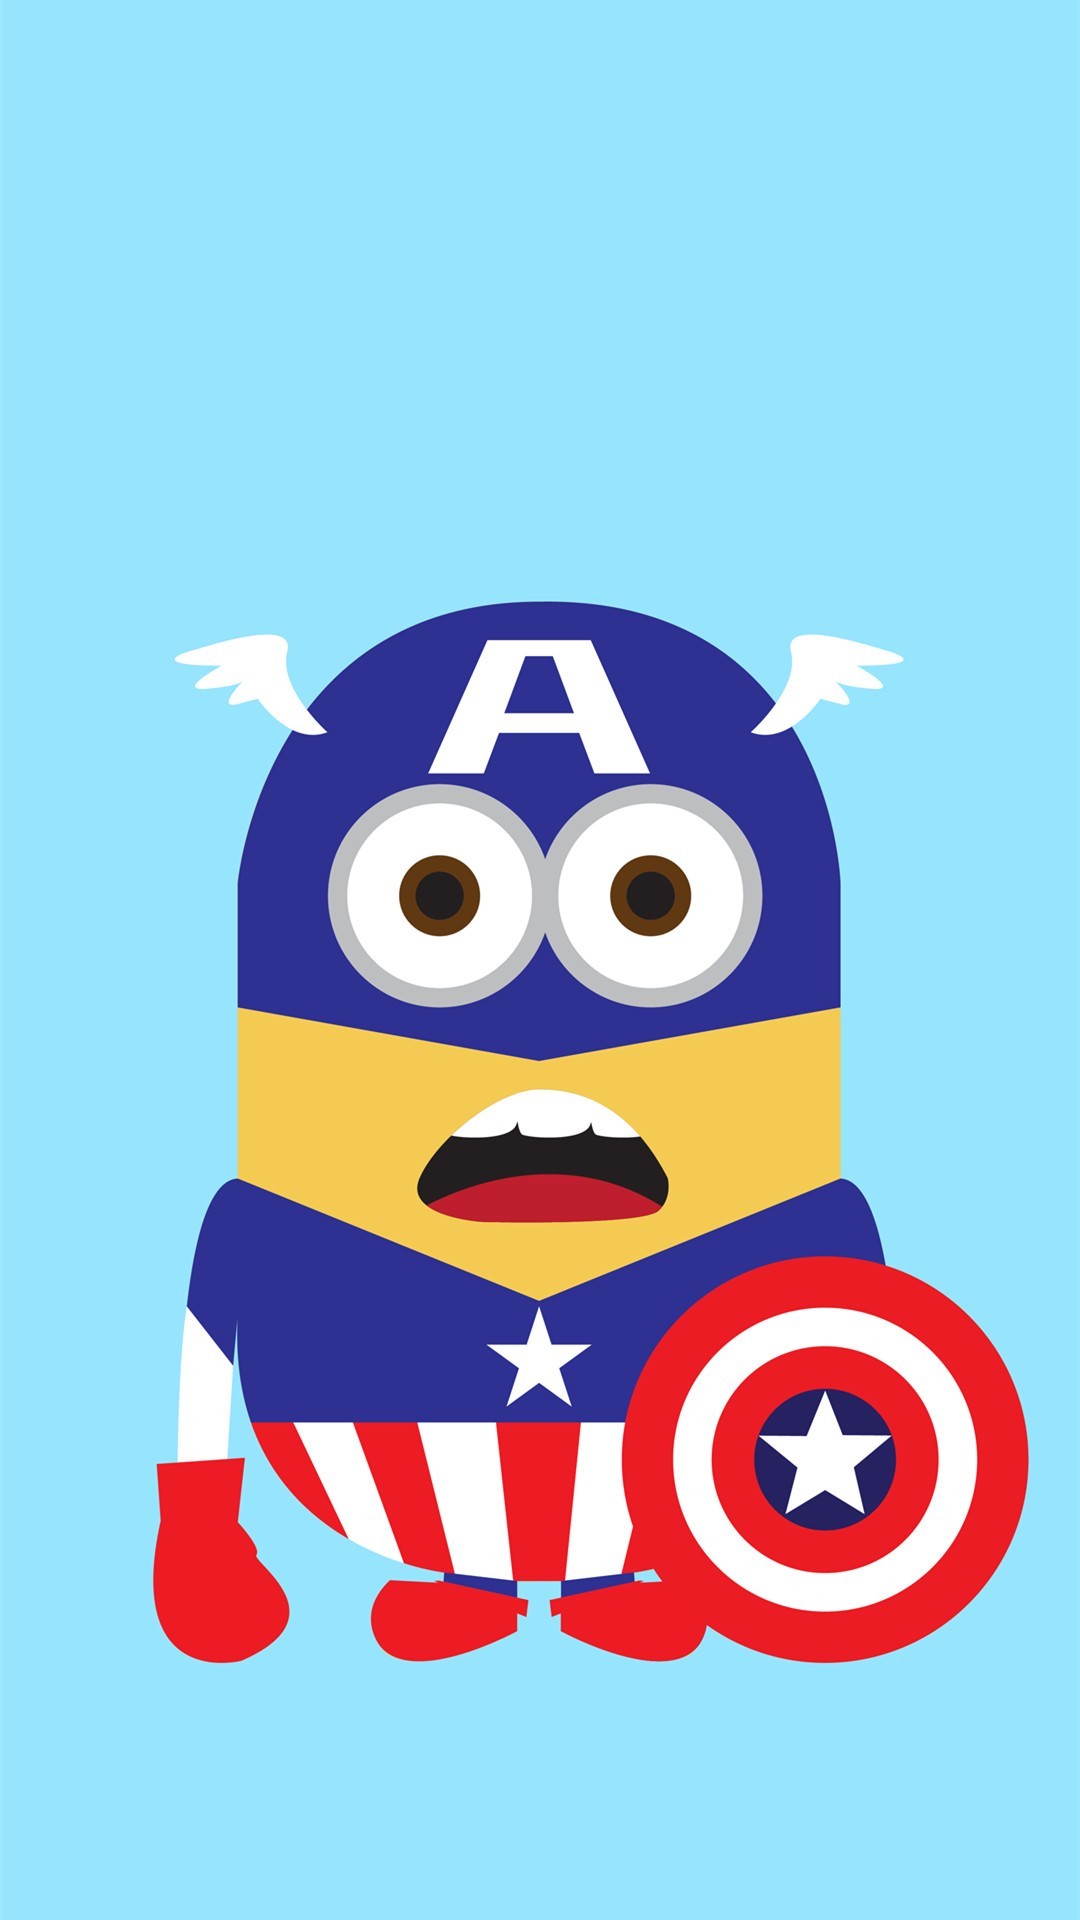 1080x1920 Despicable Me inspired Captain America minion iphone 6 plus wallpaper for  2014 Halloween